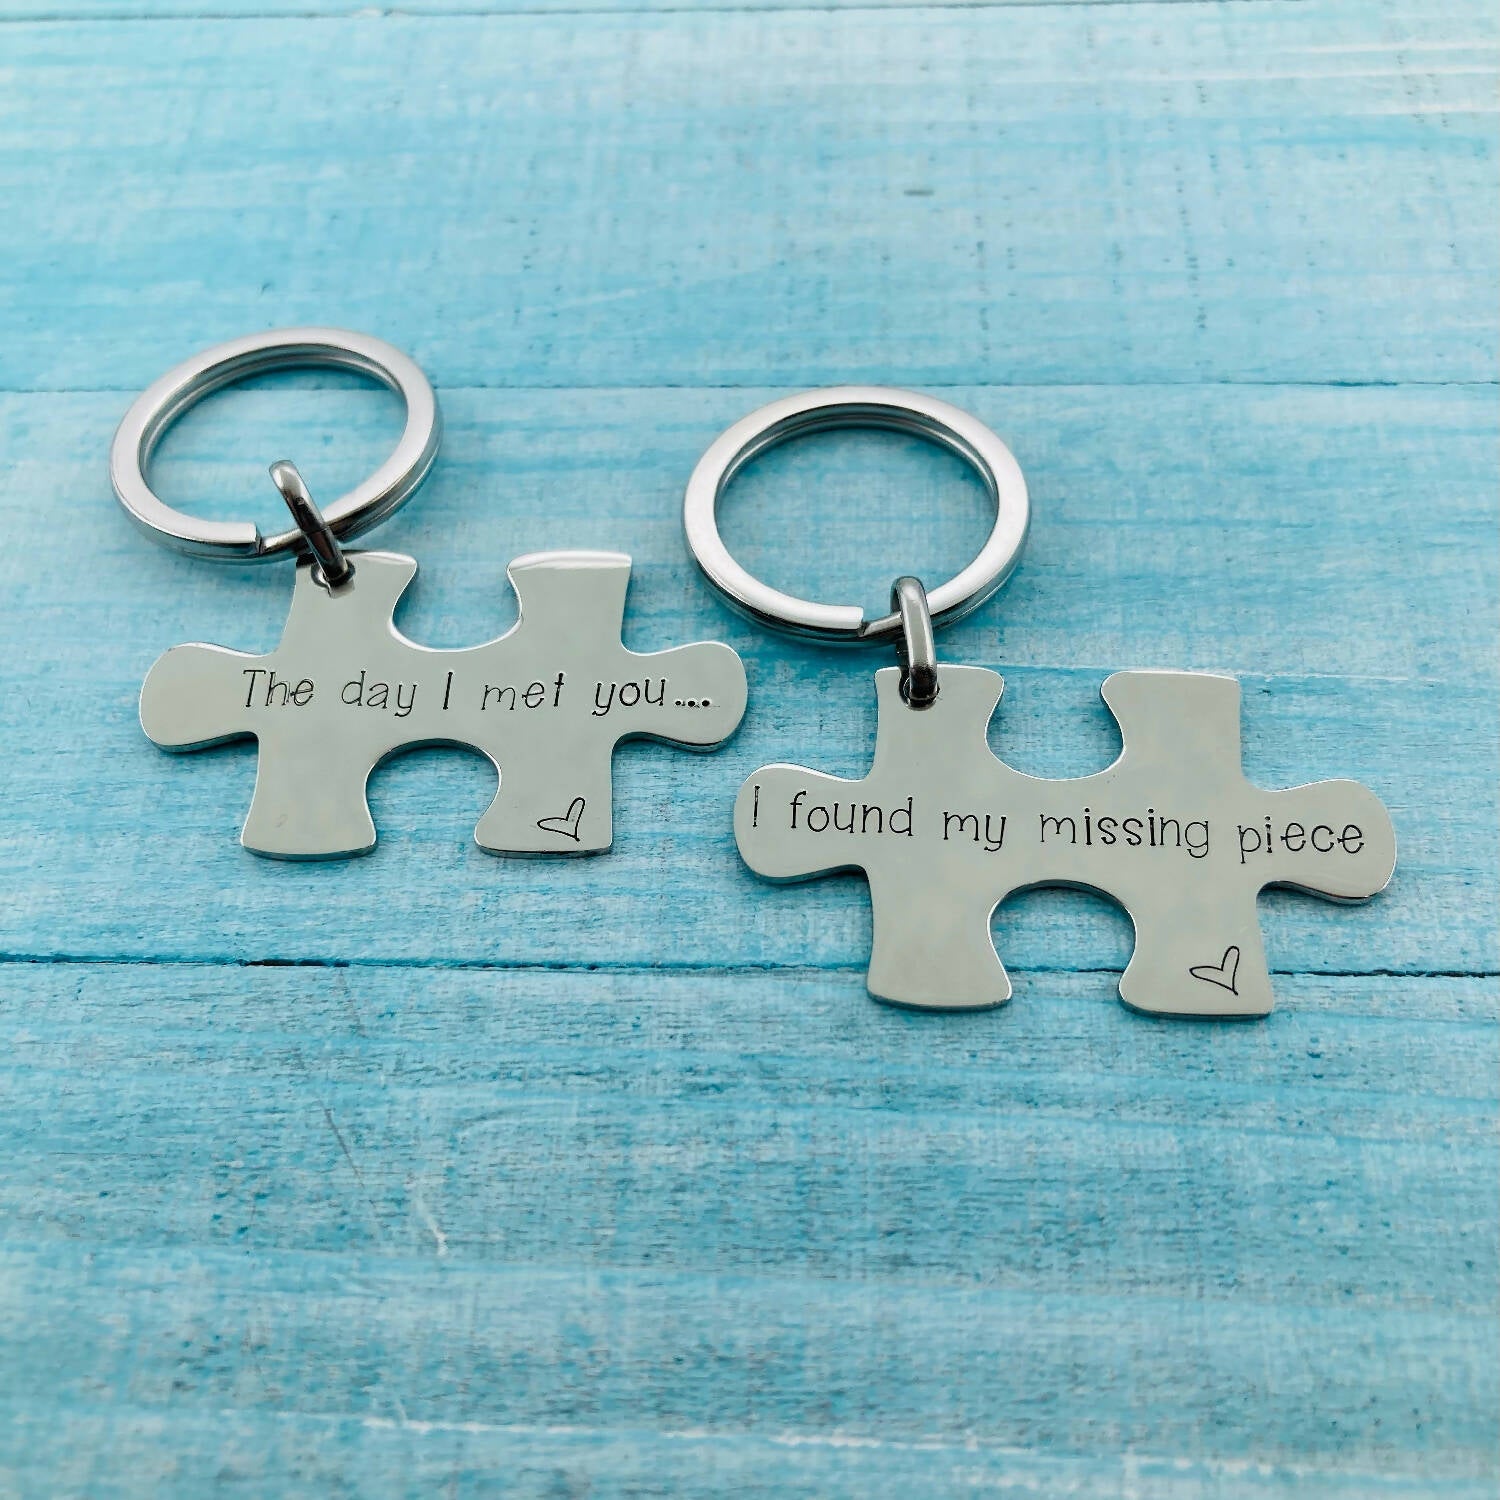 Paired keychain set - The day I met you I found my missing piece